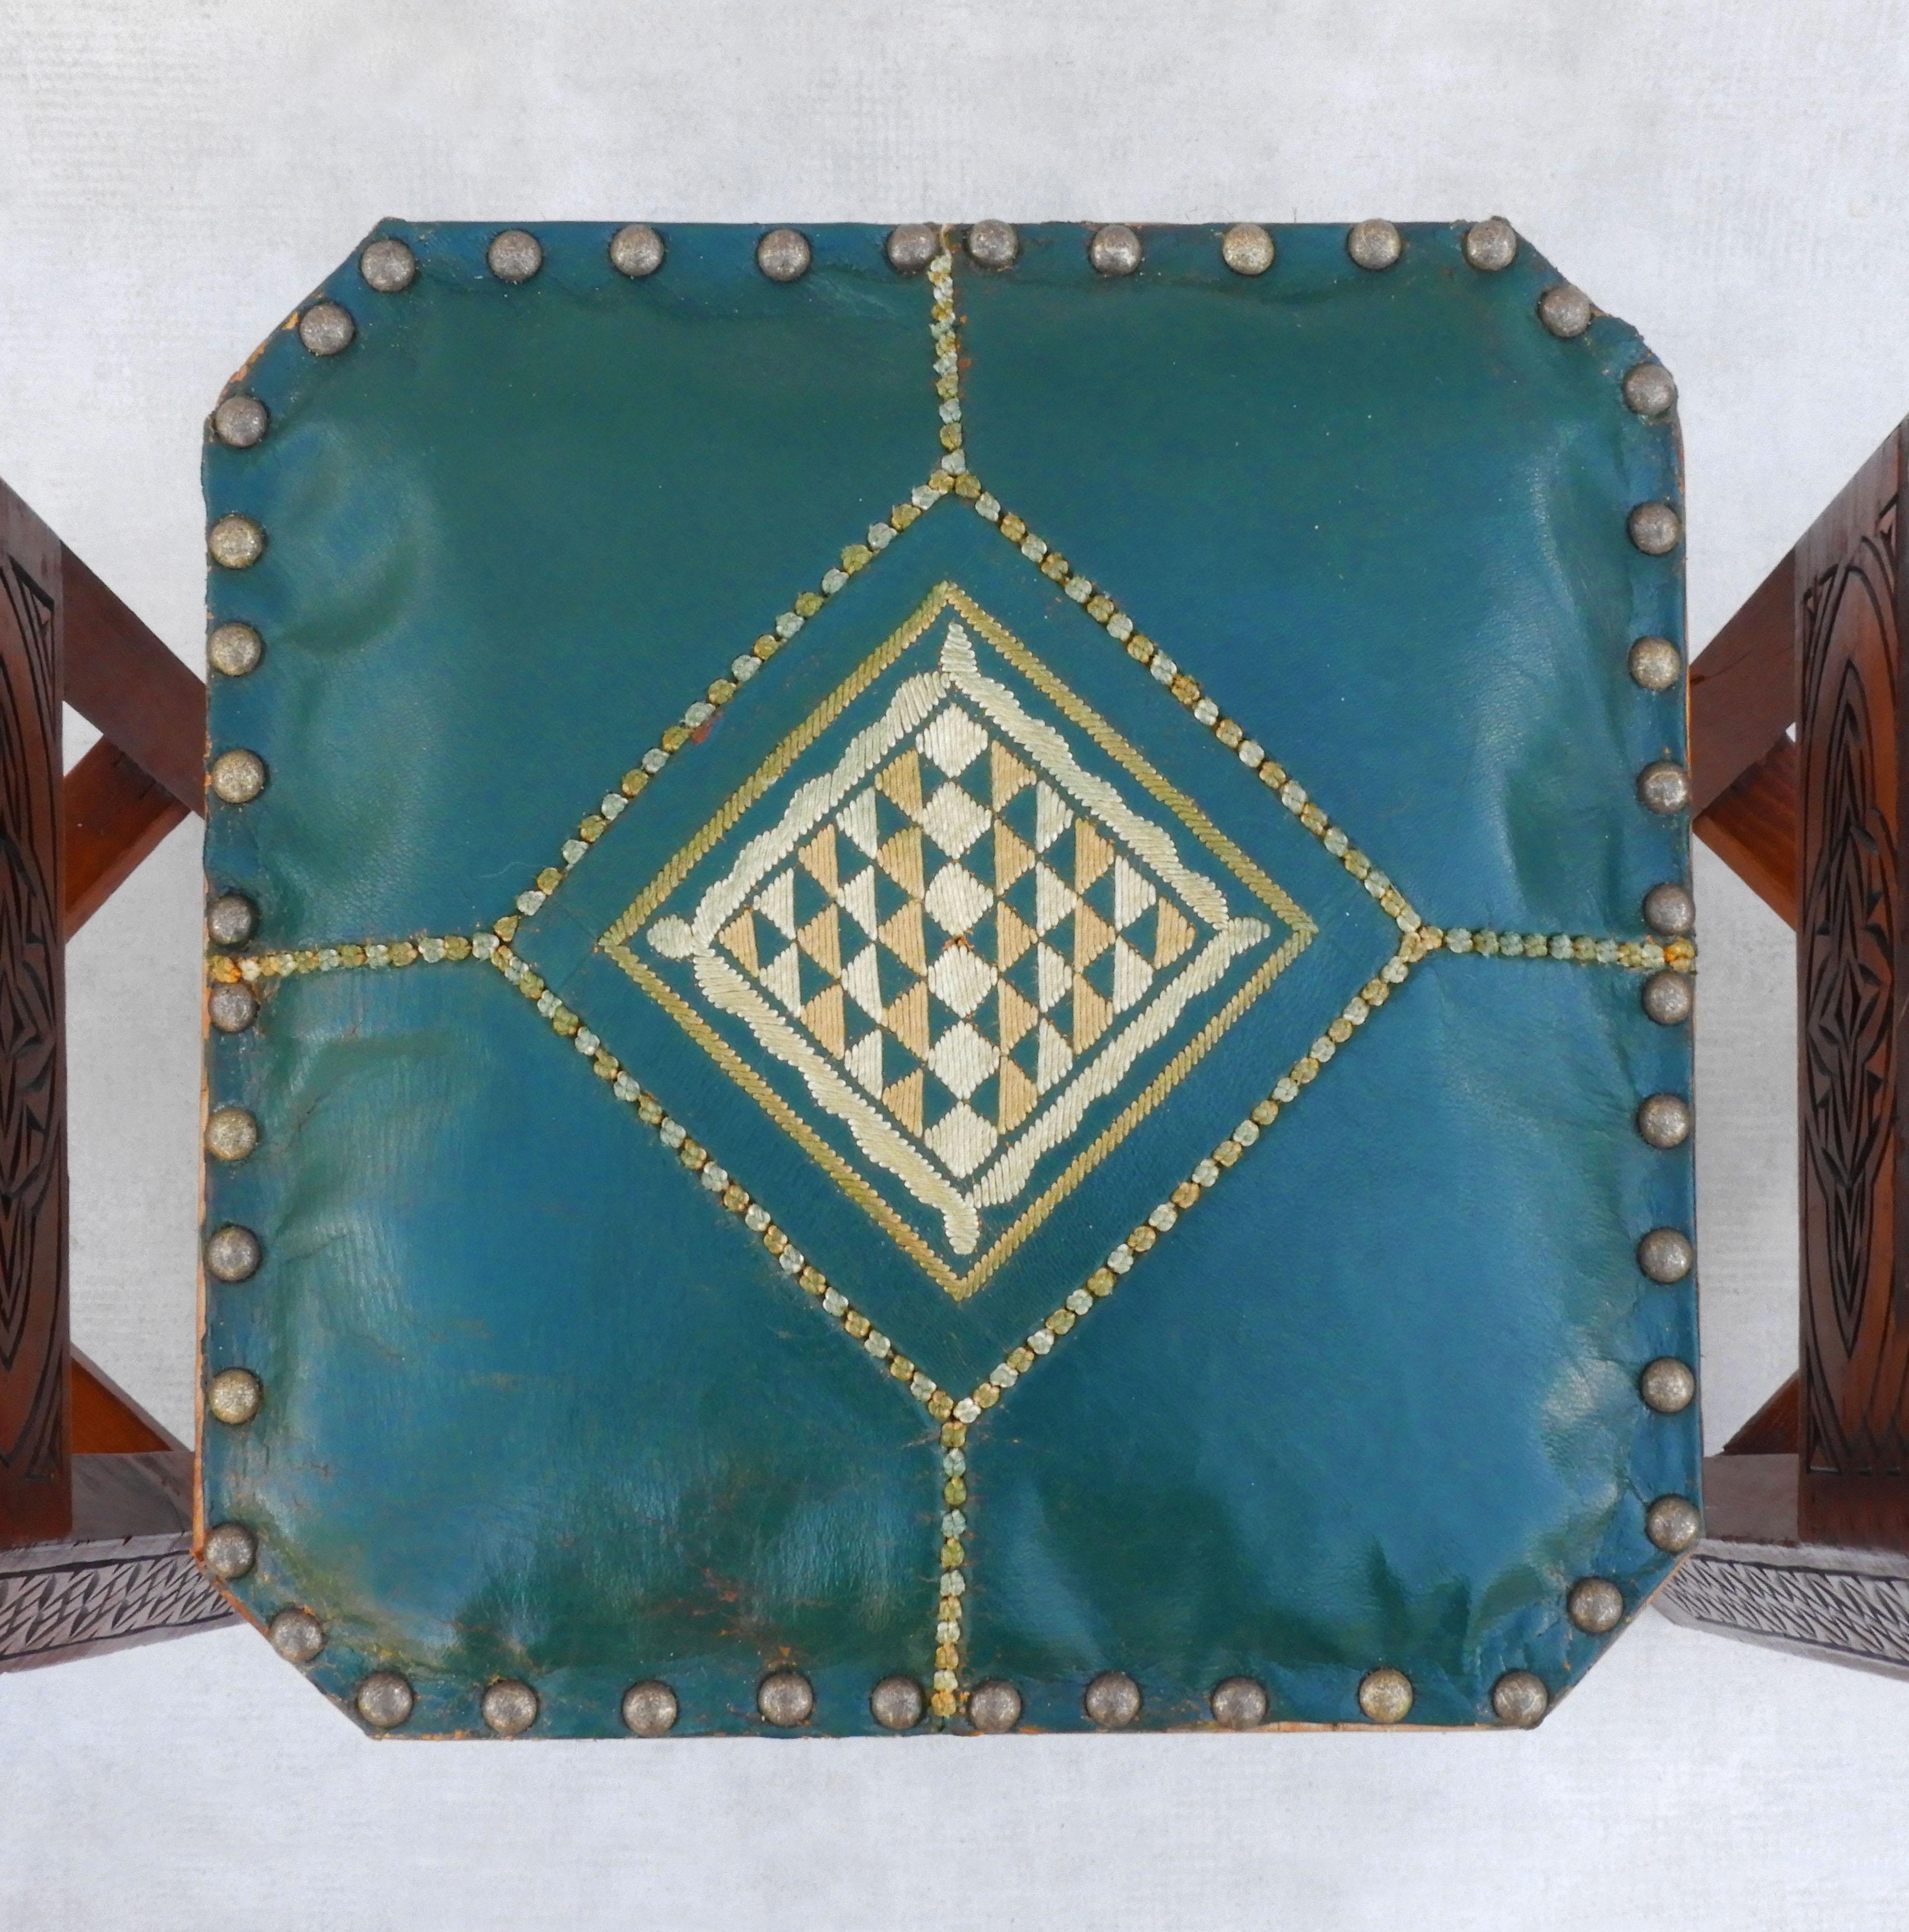 Moorish Style Tabouret Stools Hand Carved Wood and Embroidered Leather C1950s For Sale 1